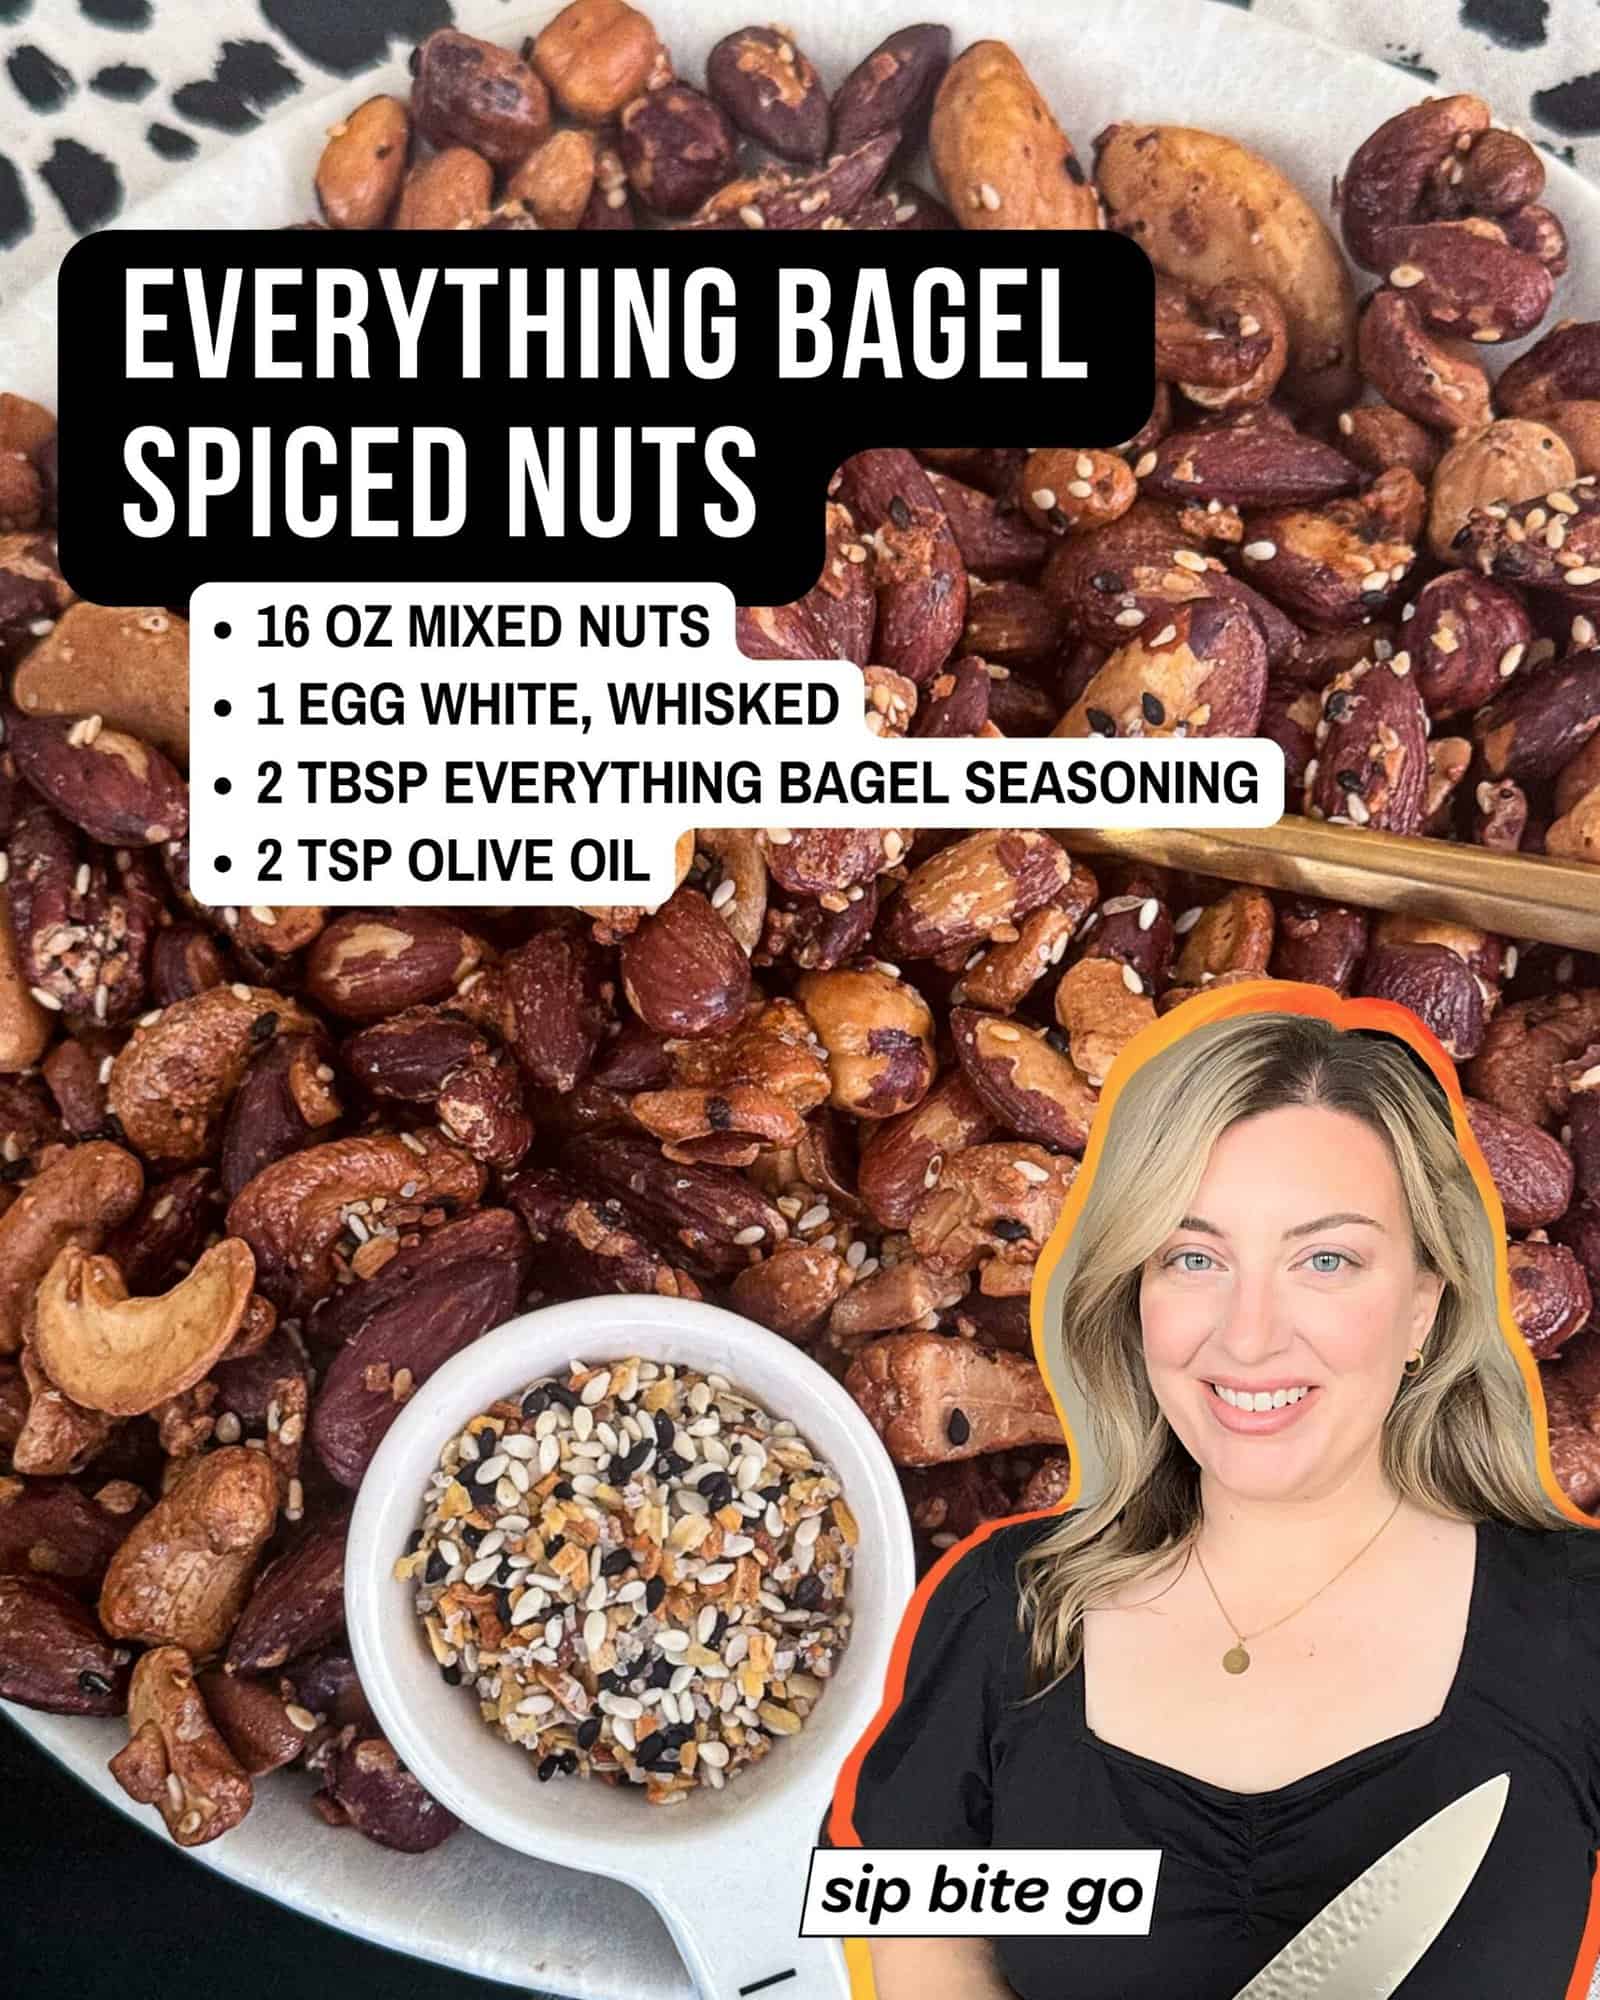 List of Homemade Everything Bagel Spiced Nuts Ingredients 